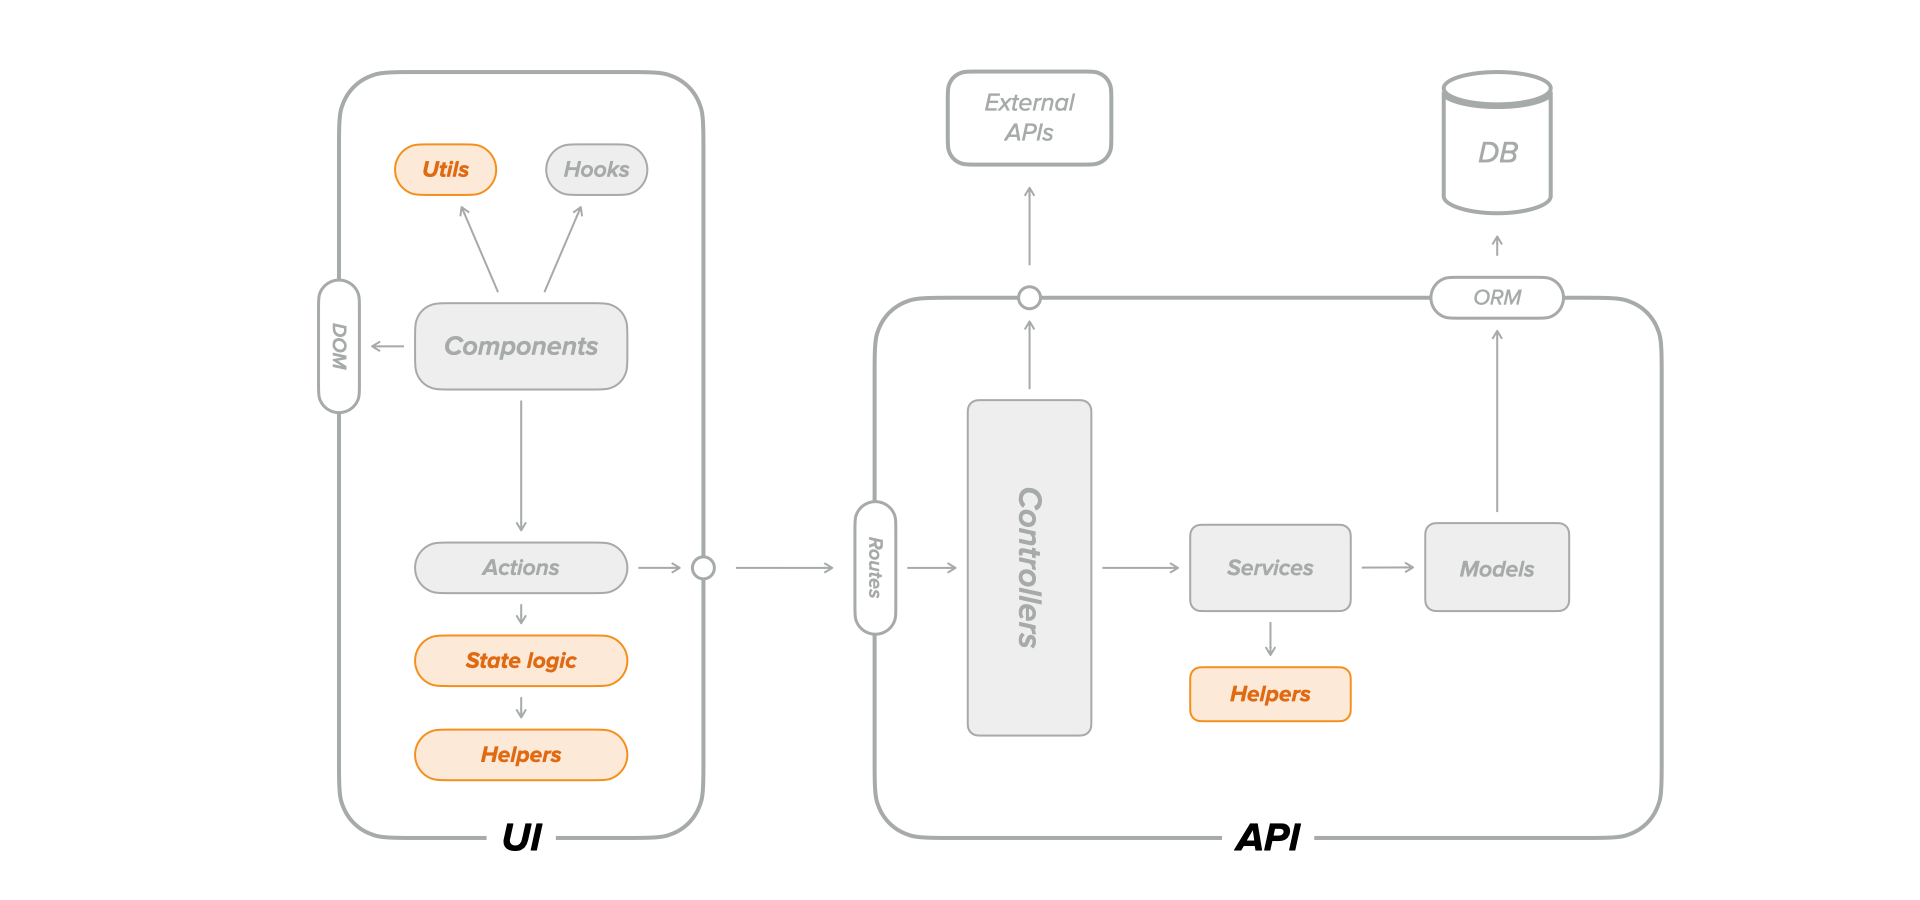 A detalied architecture diagram, highlighting the major components I usually unit test, namely state logic and utils/helpers files, both on UI and API.